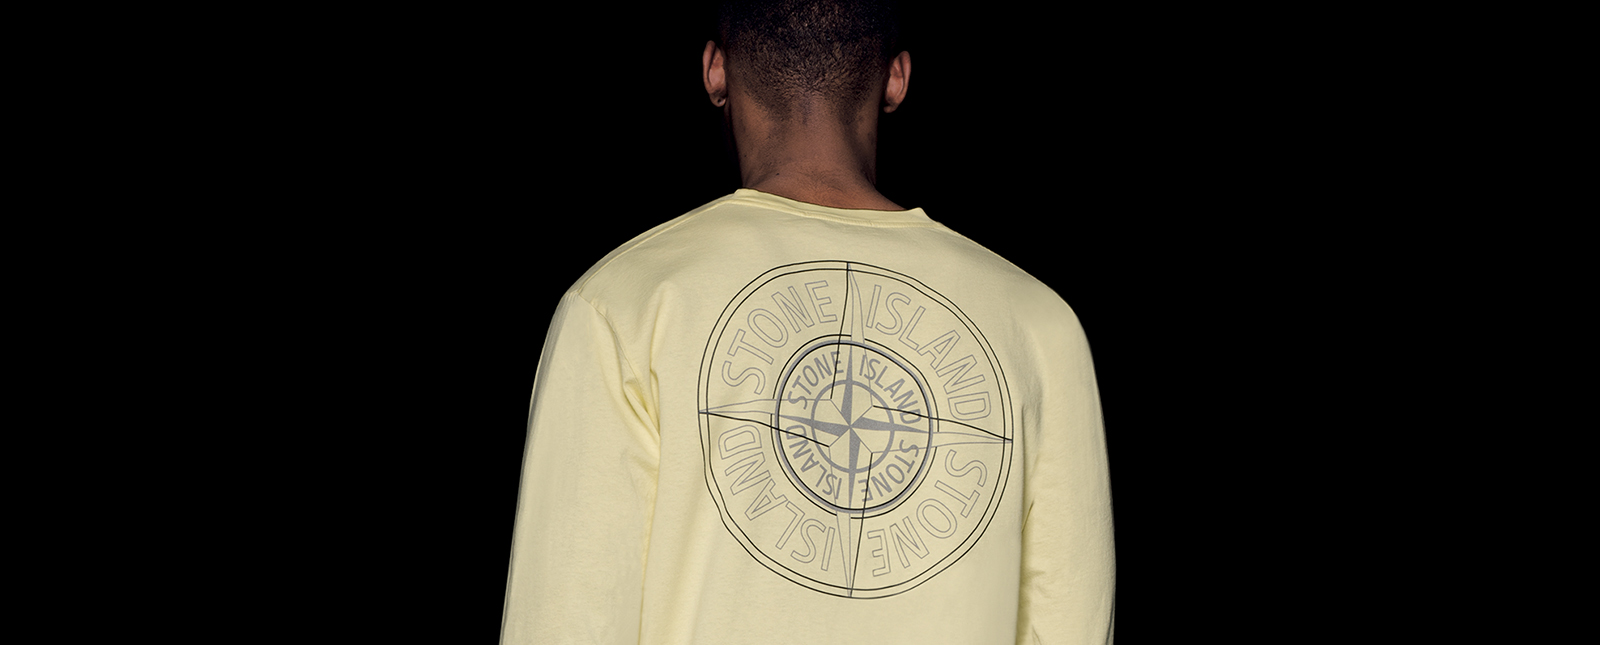 Polo Shirts t Shirts Stone Island - Official Store